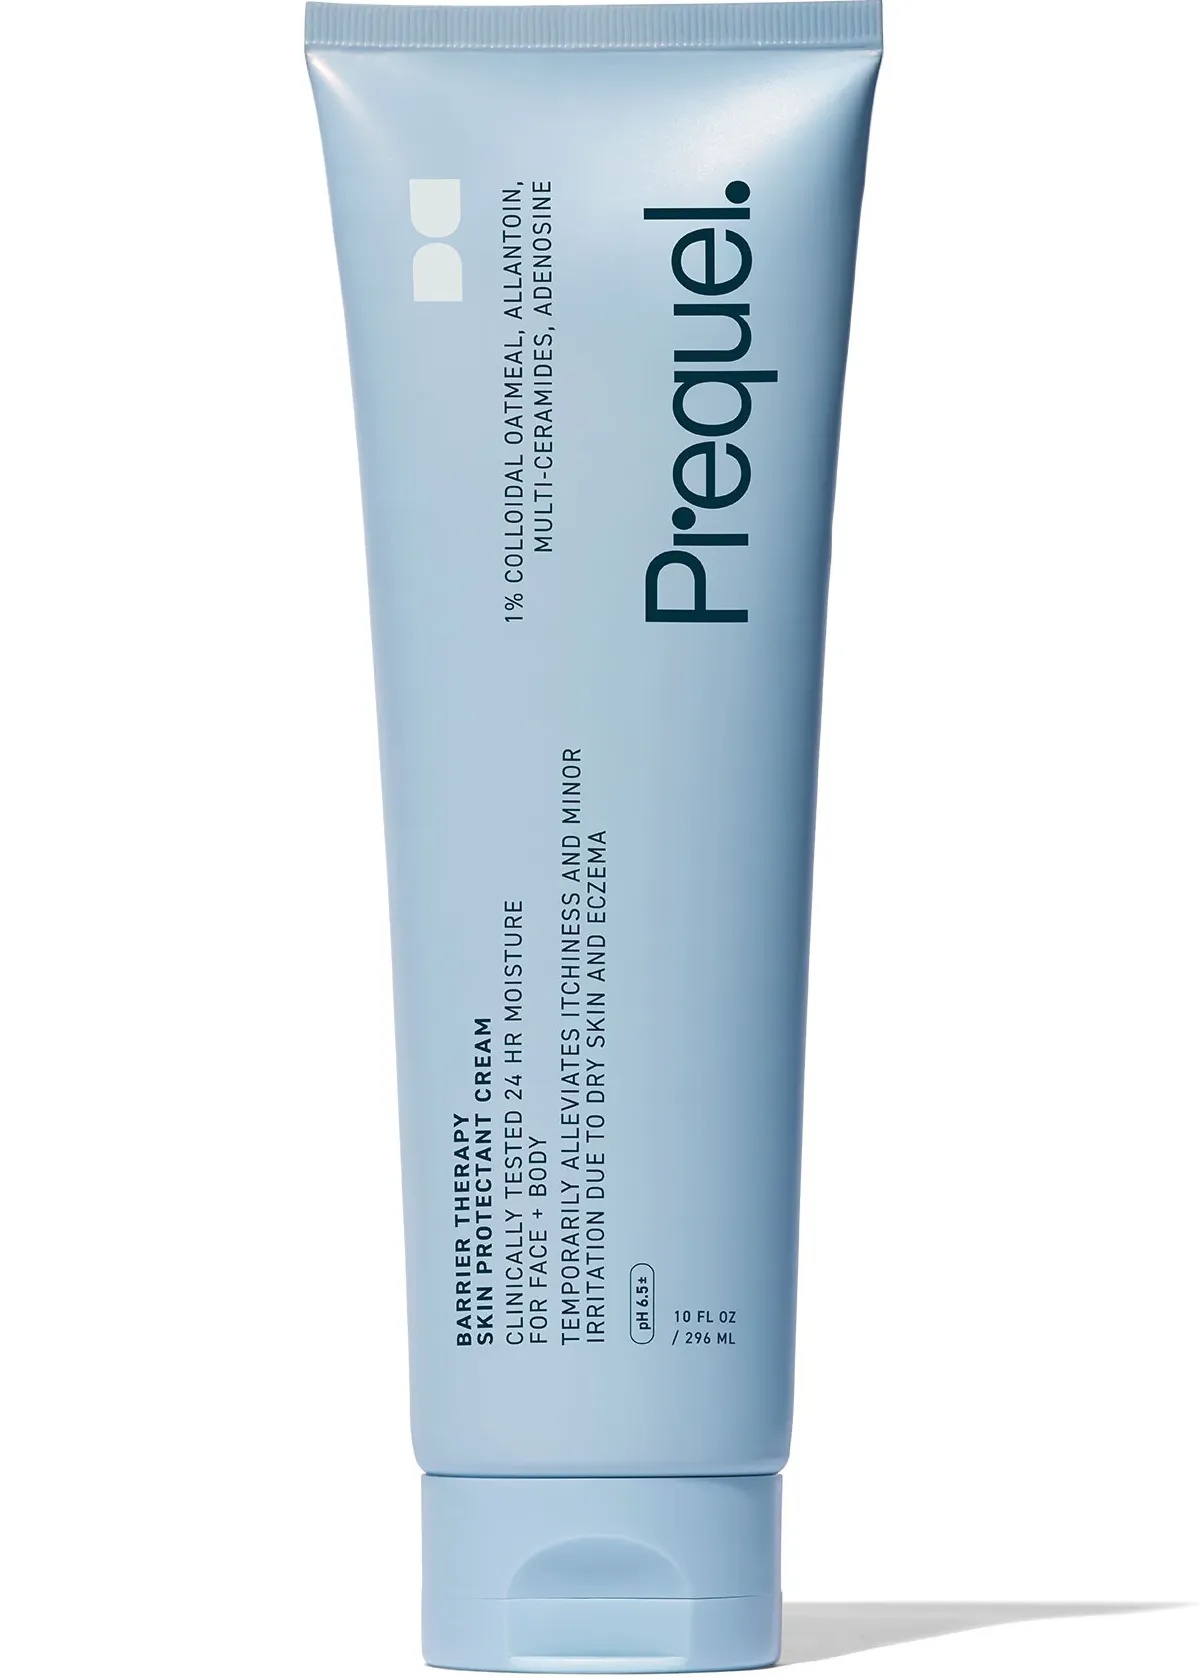 Prequel Barrier Therapy Skin Protectant Cream